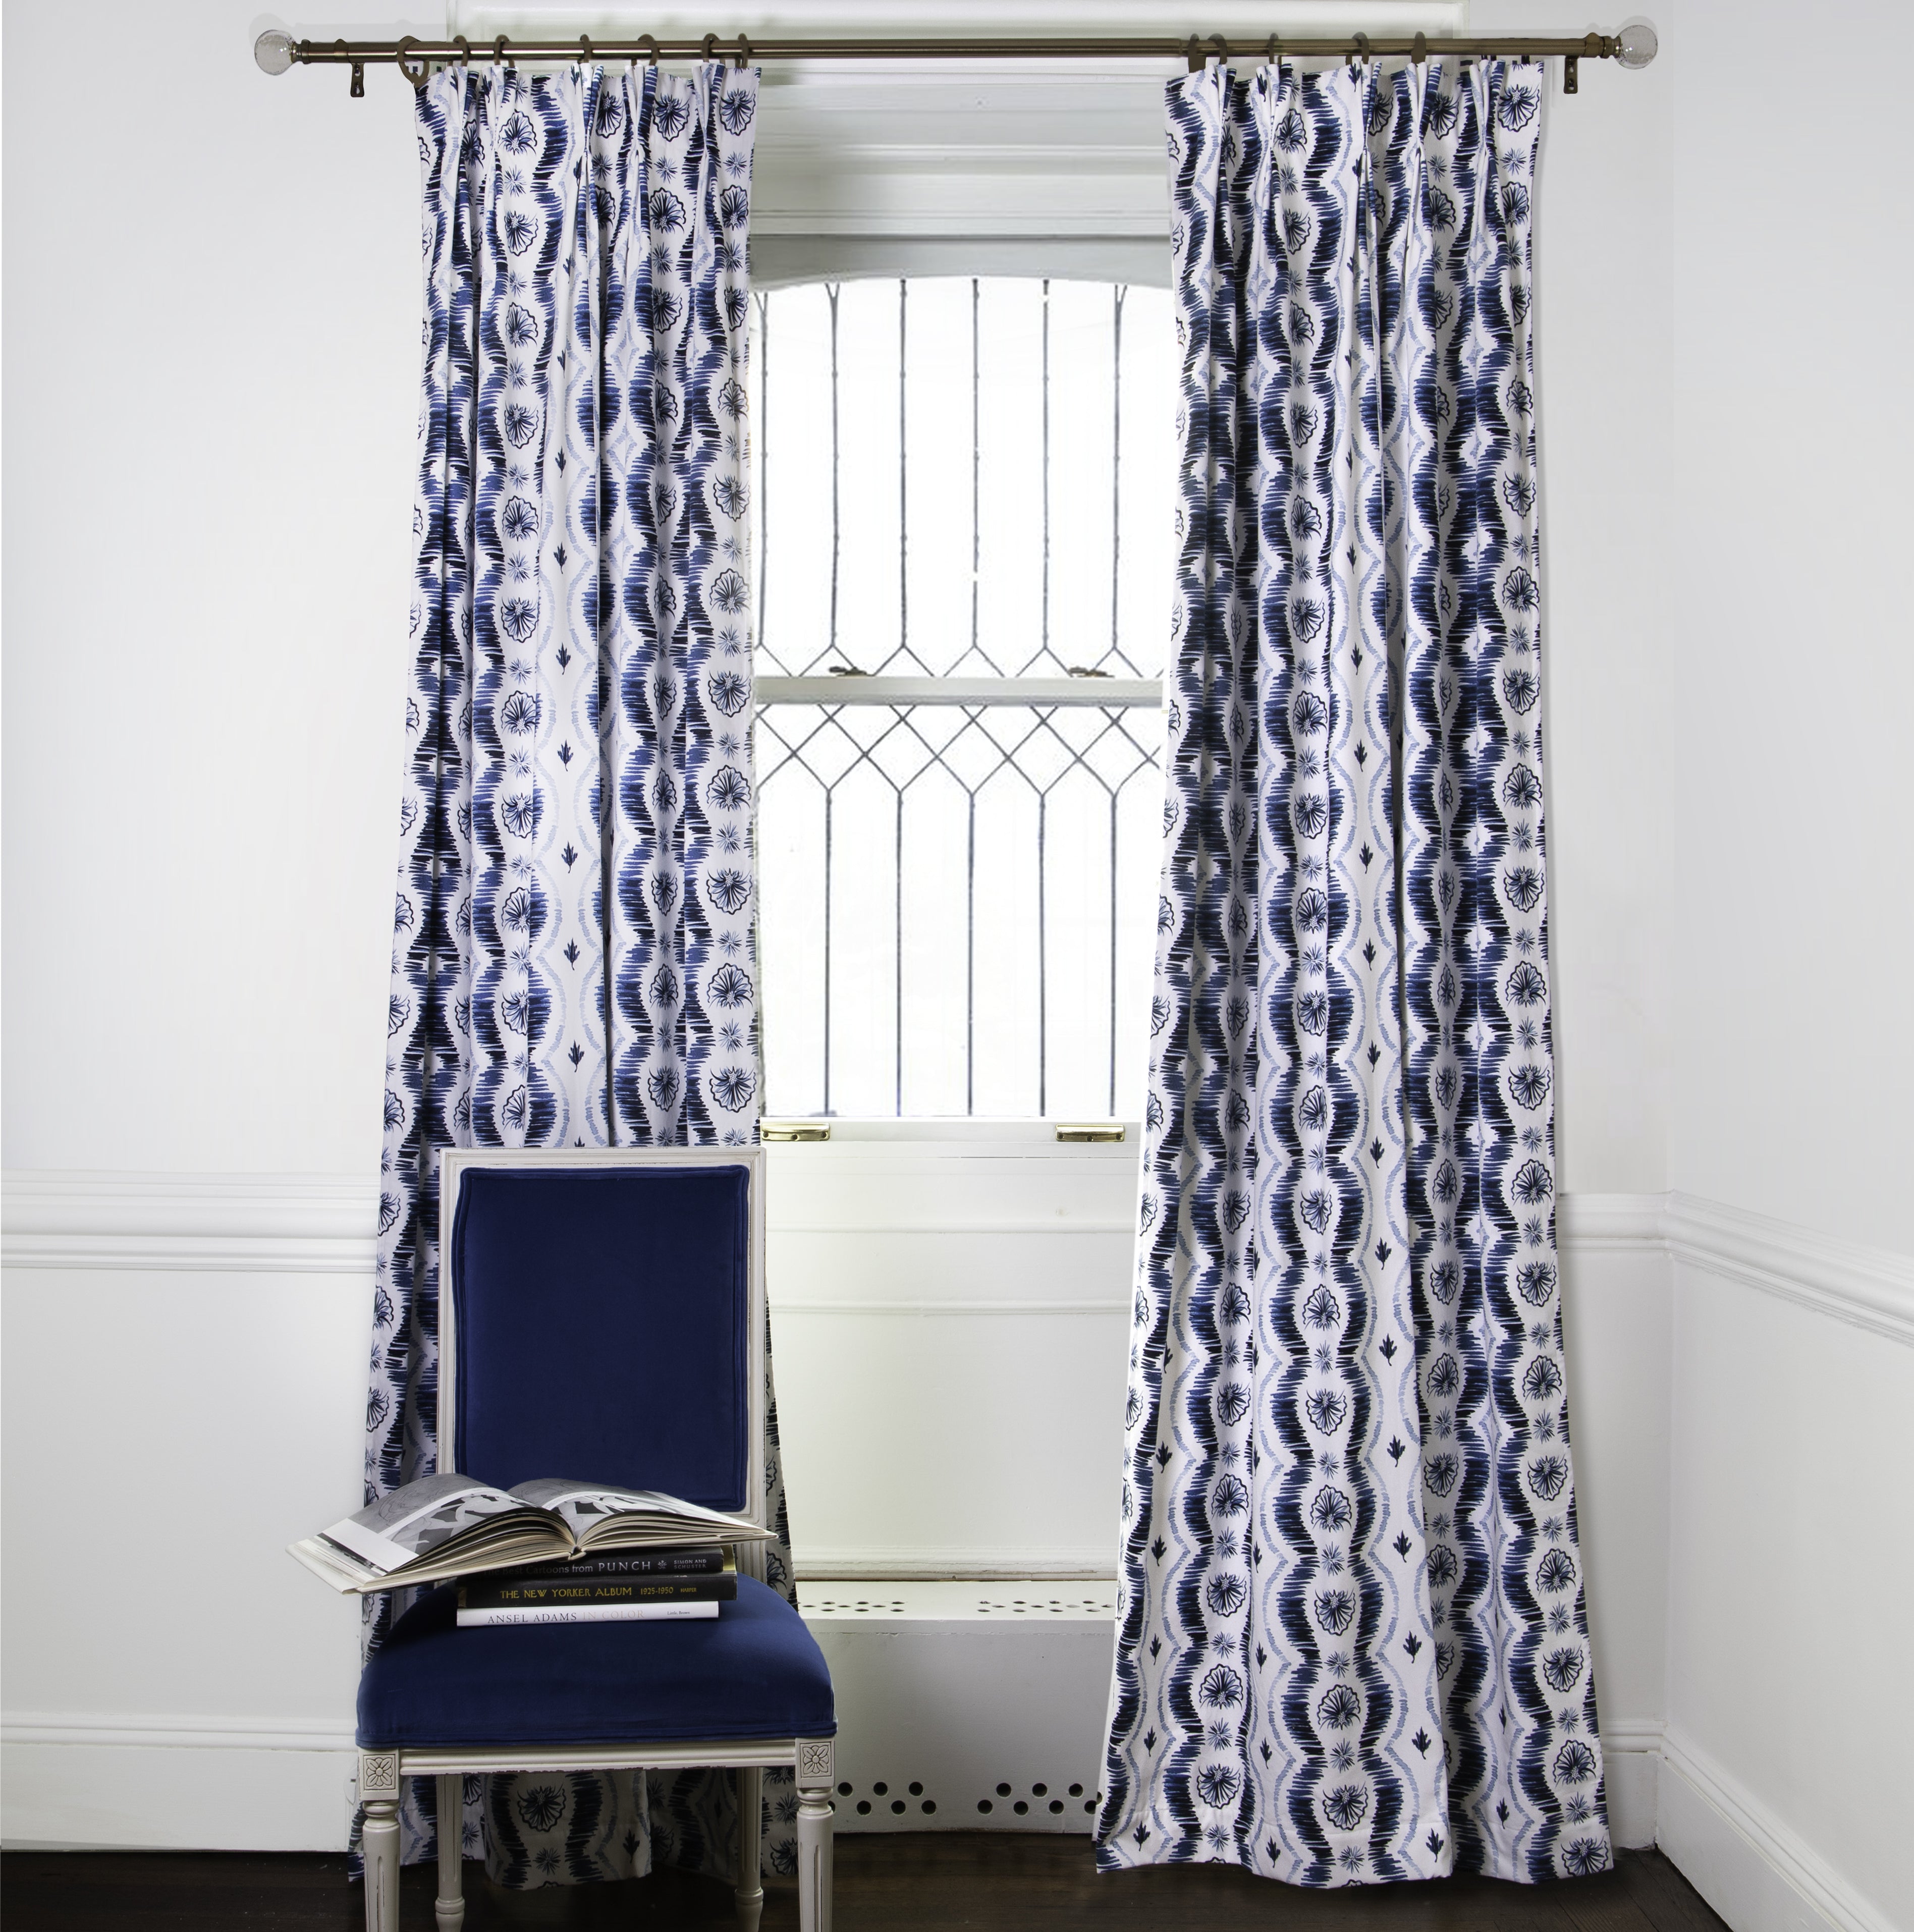 Blue Itak Striped Printed Custom Curtains on metal rod in front of an illuminated window with navy chair in front stacked with books